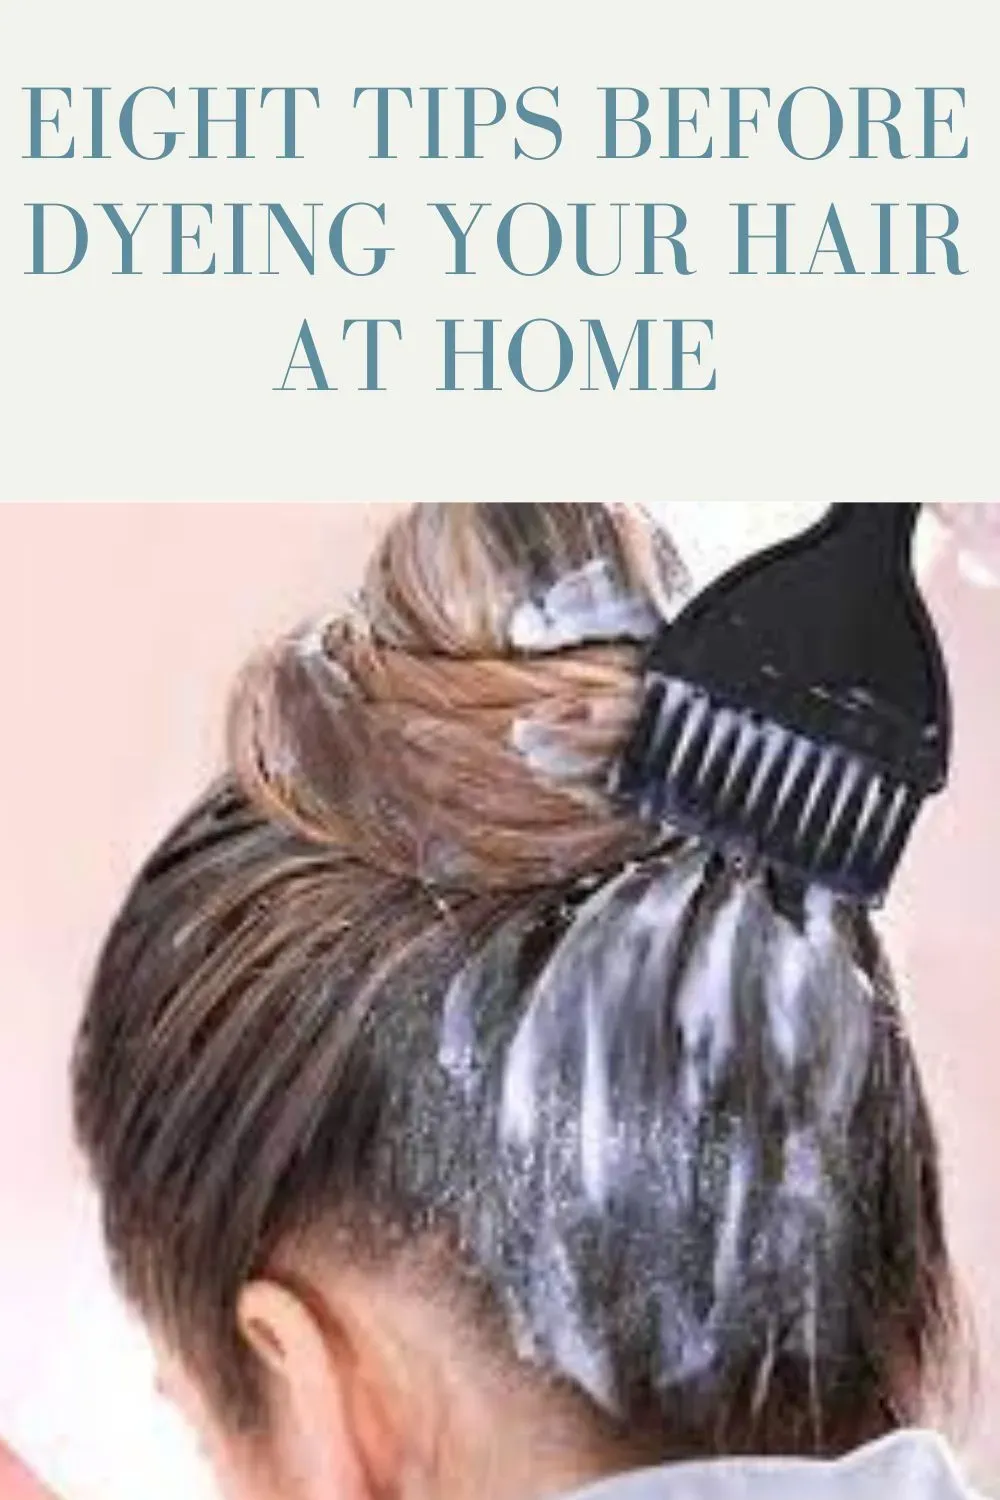 Eight tips before dyeing your hair at home